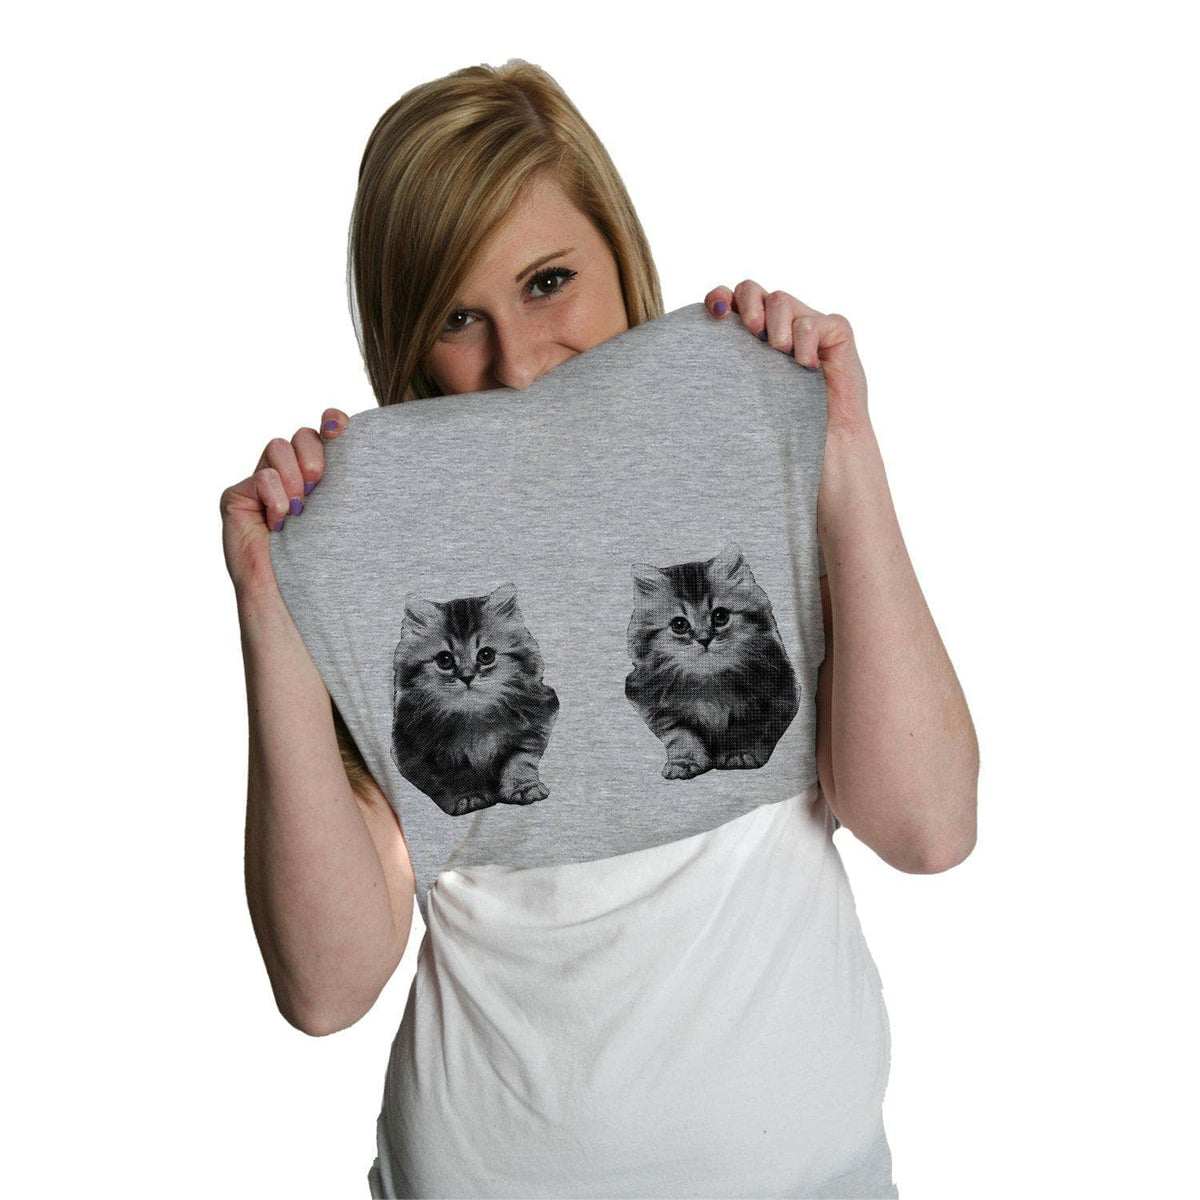 Ask Me About My Kitties Women&#39;s Tshirt  -  Crazy Dog T-Shirts